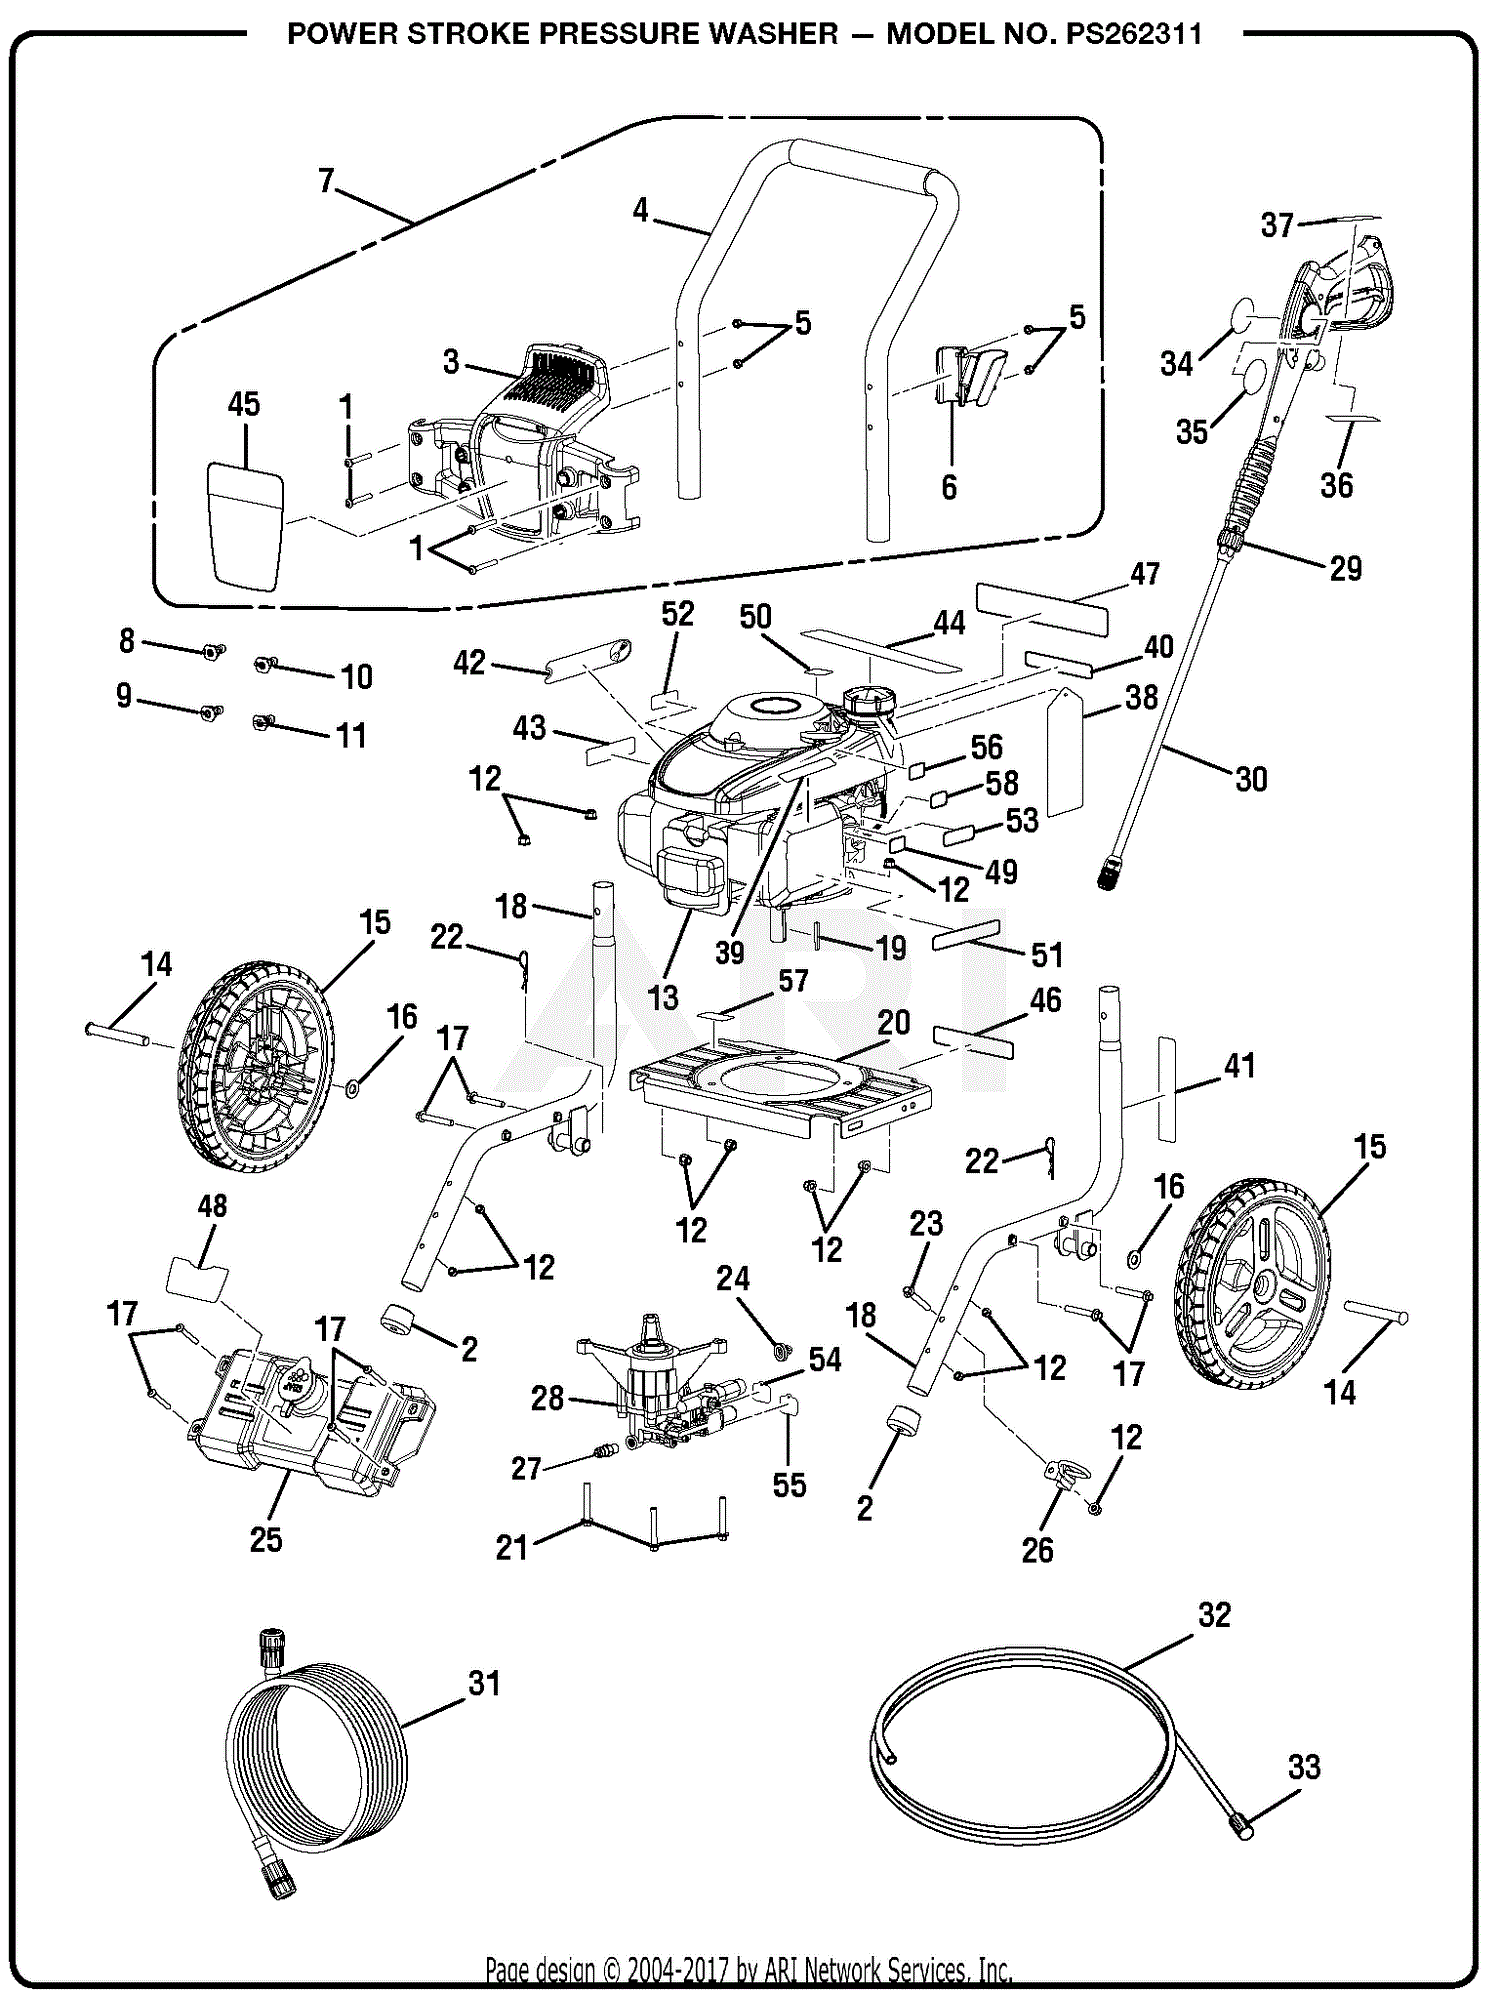 Homelite Ps262311 Pressure Washer Parts Diagram For Power